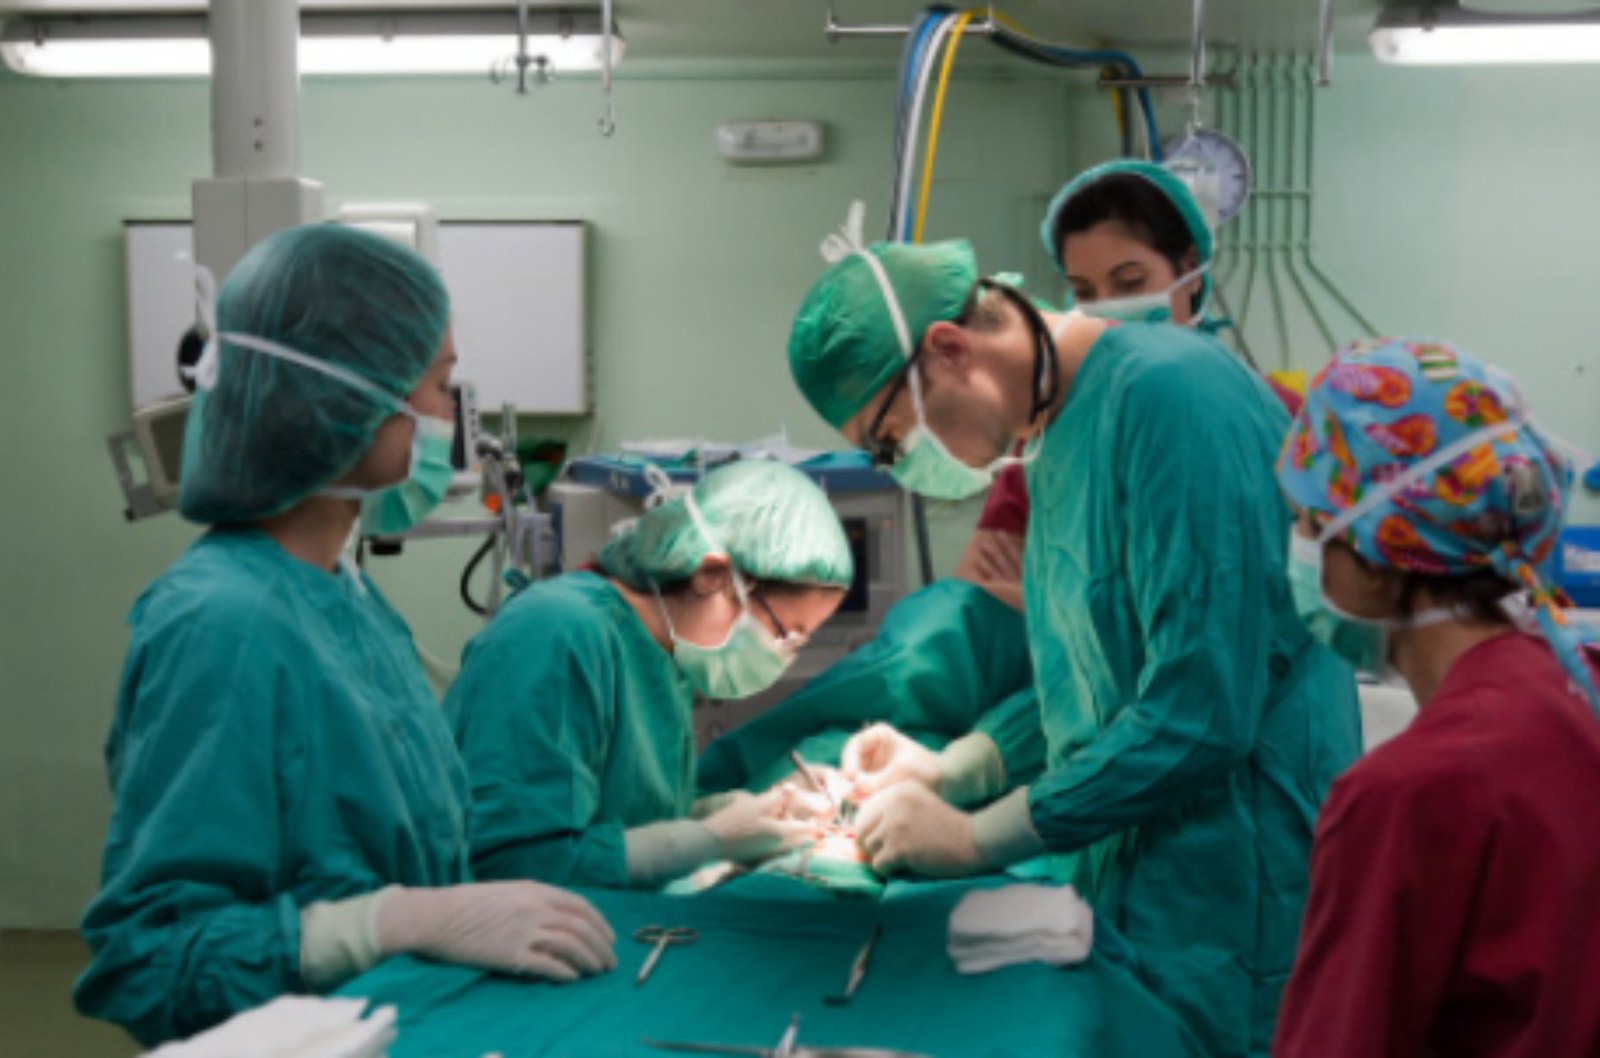 From Hardware Store to Operating Room